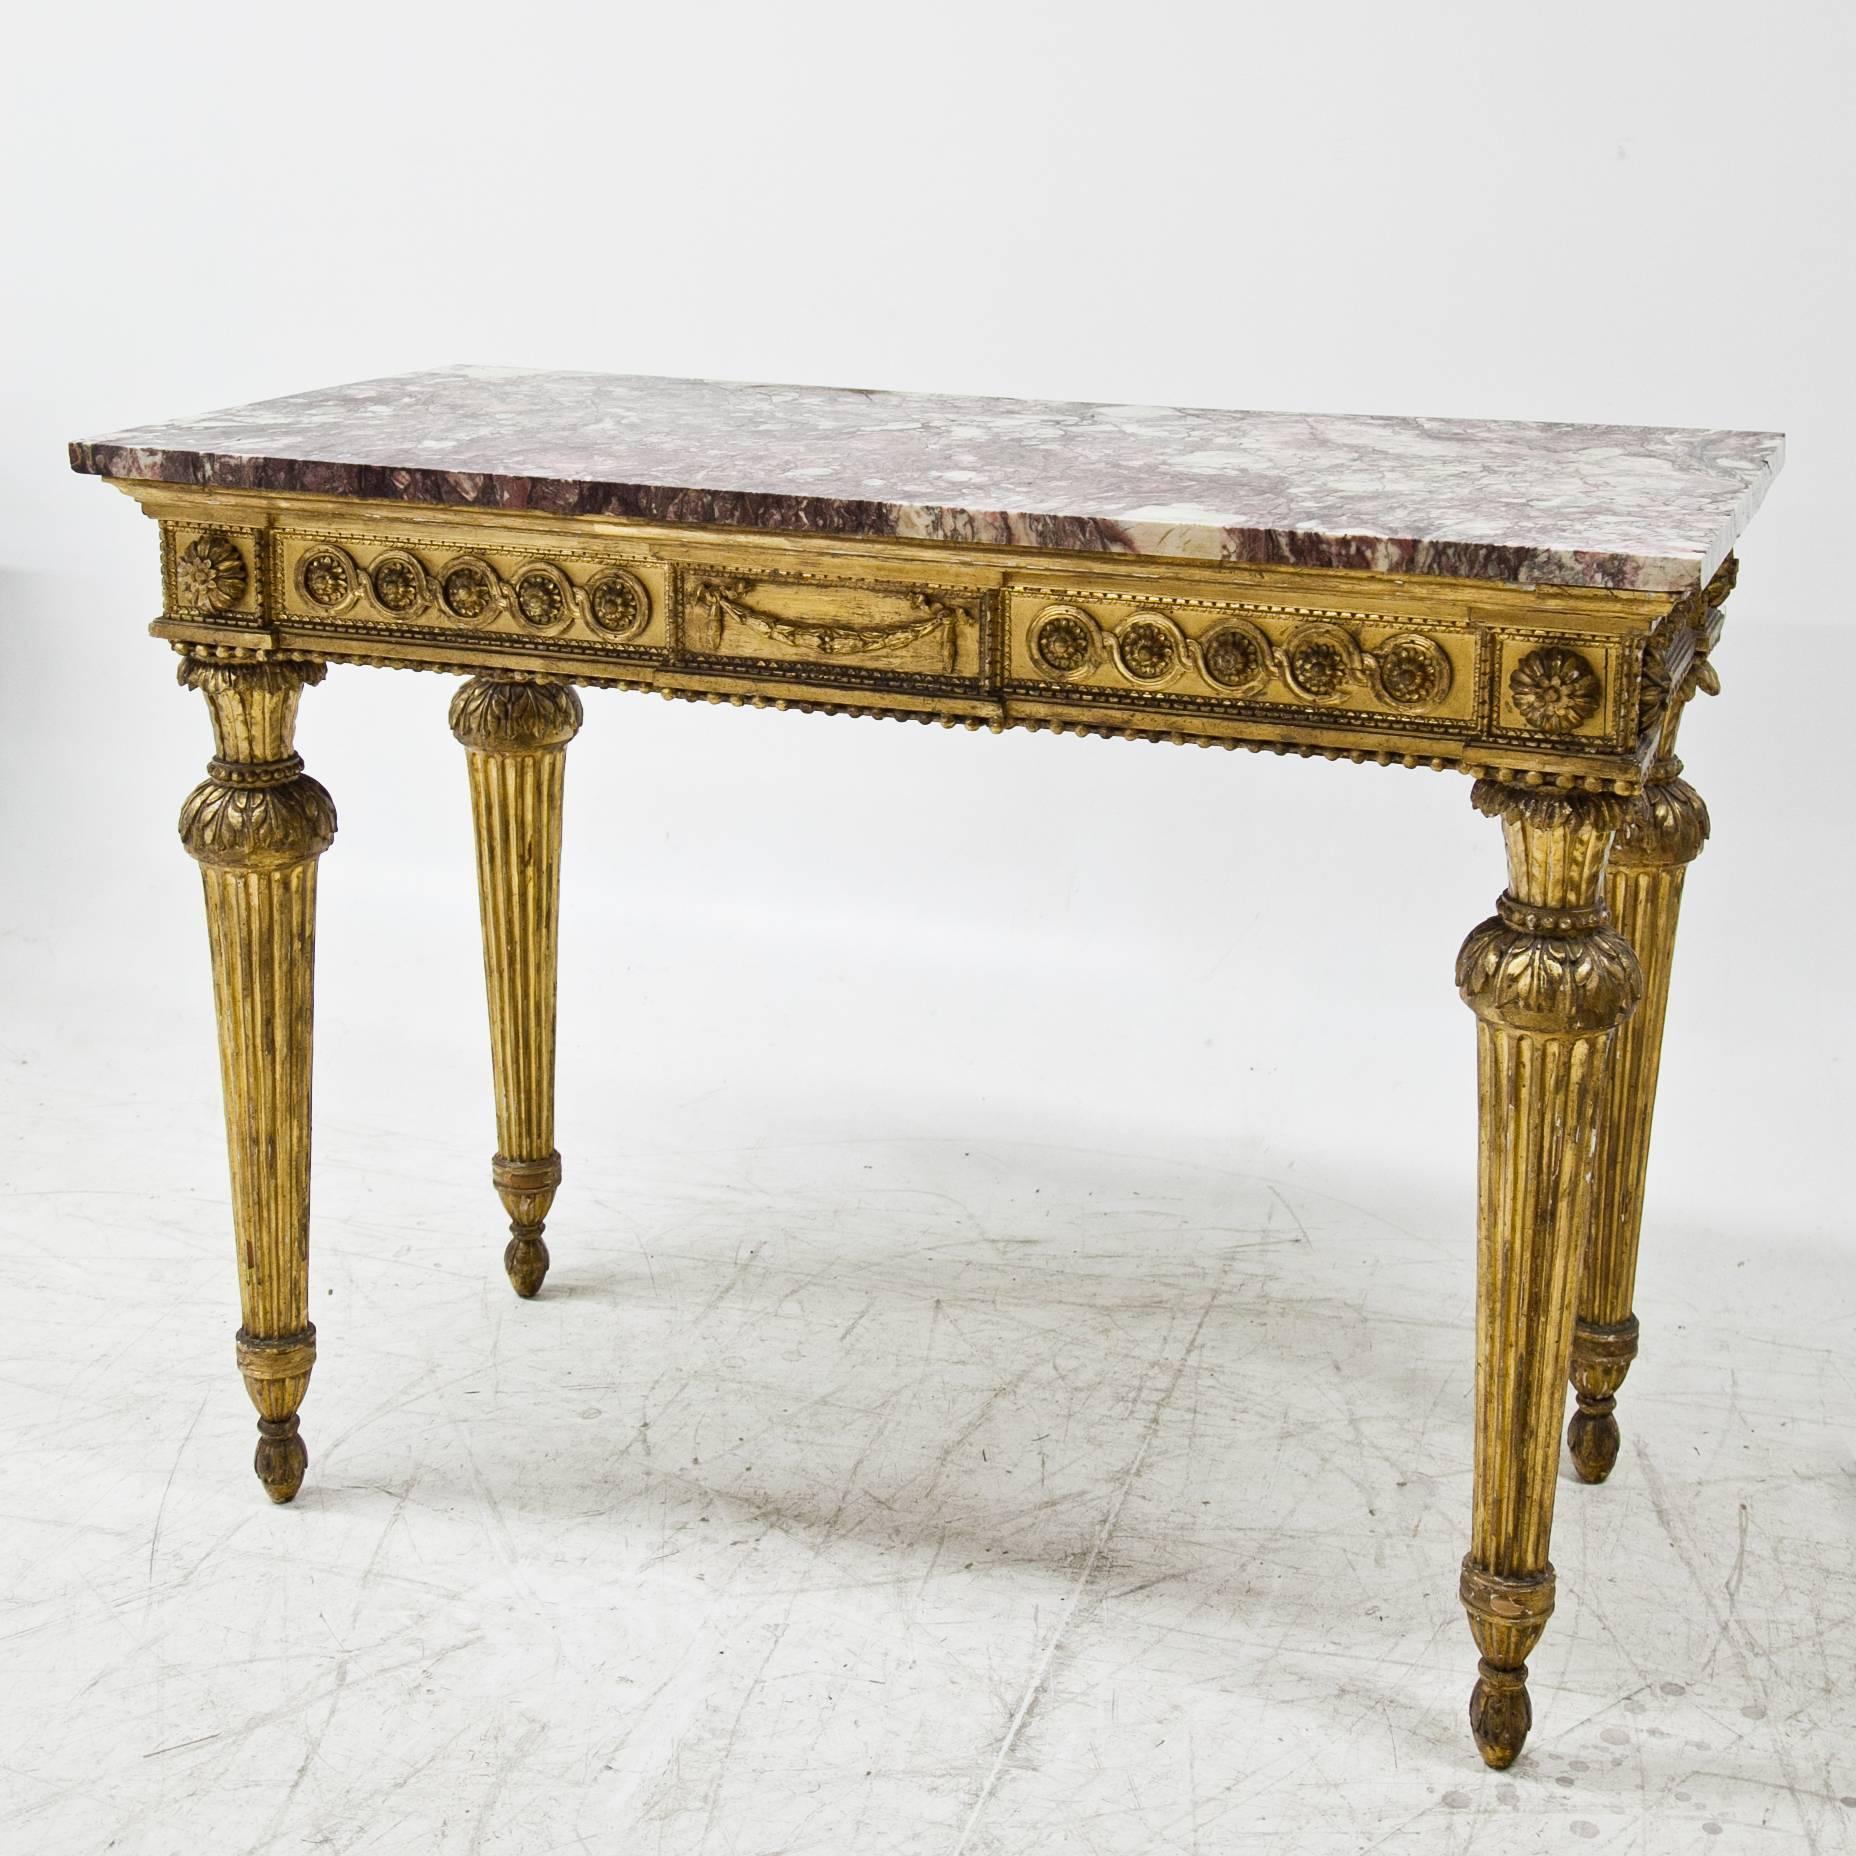 Gilt Louis Seize console table on fluted legs, the front rail is decorated with interlaced ornaments, flowers, festoons and beads. The red and white marble top completes this beautiful piece of furniture, it was added later in the 19th century.